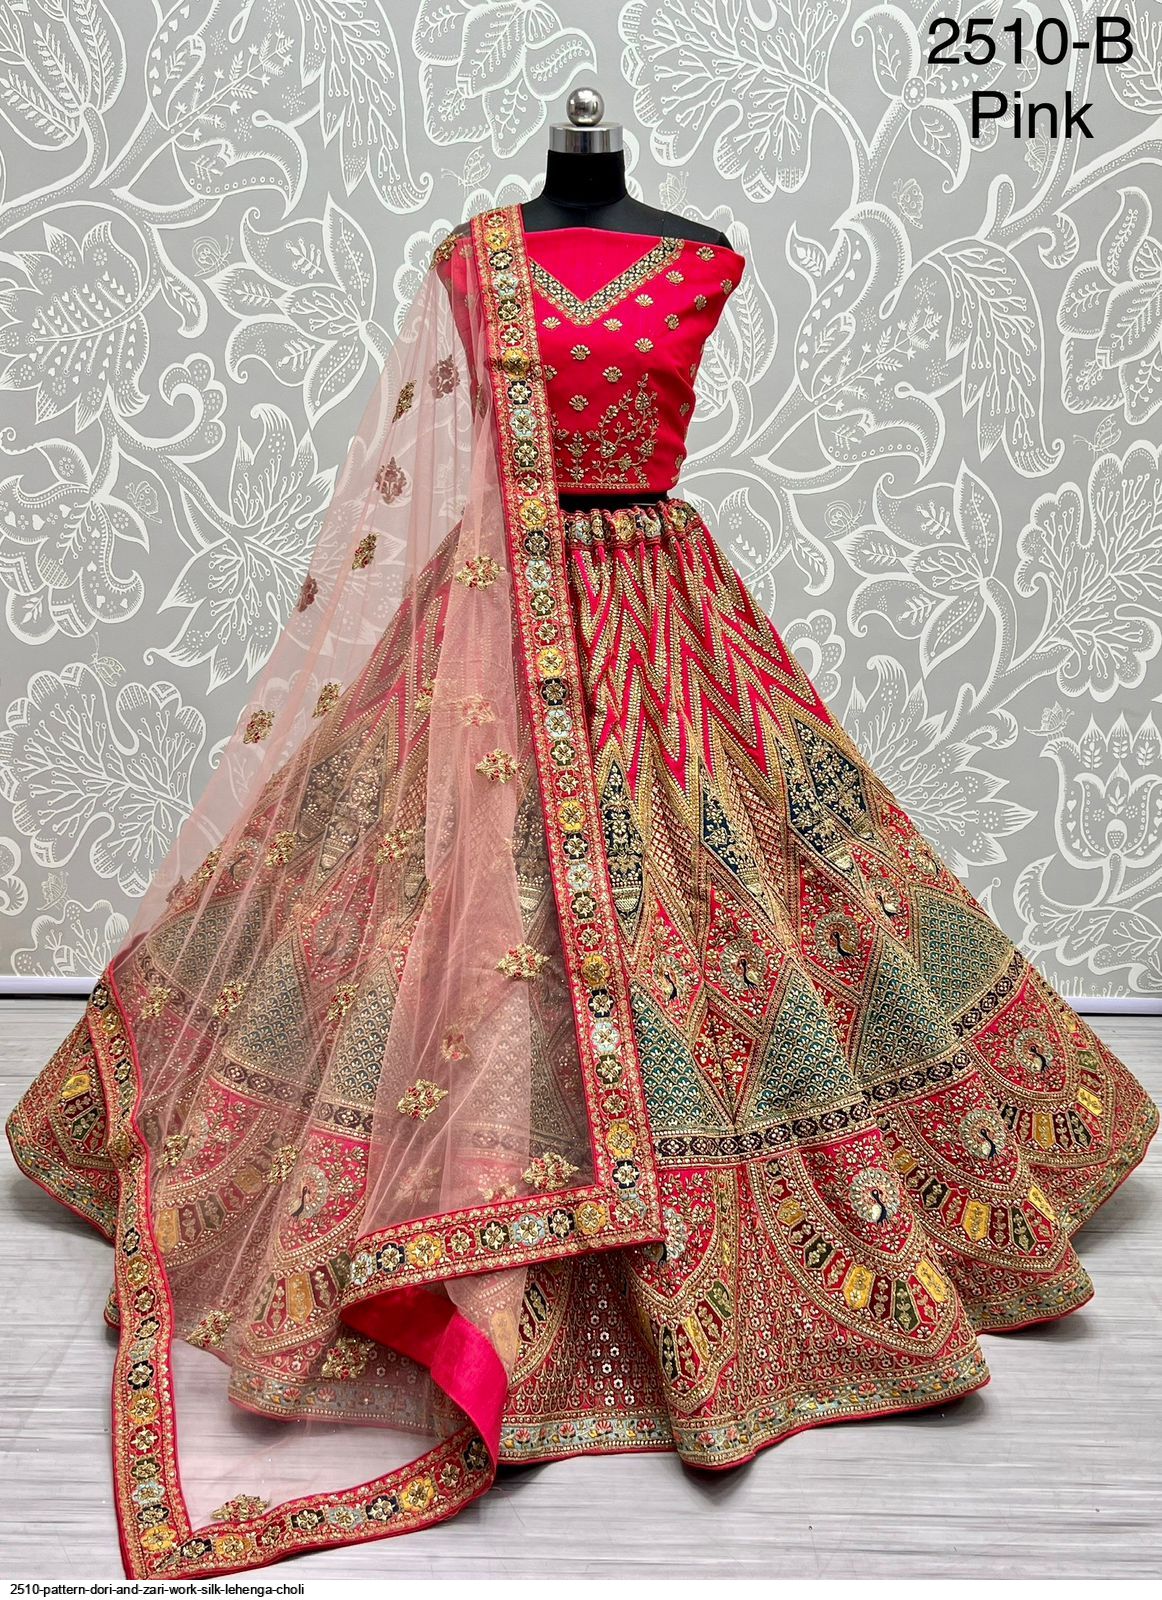 Tips to sew a lengha. #lengha #sew | Skirt patterns sewing, Lehenga pattern,  Sewing online